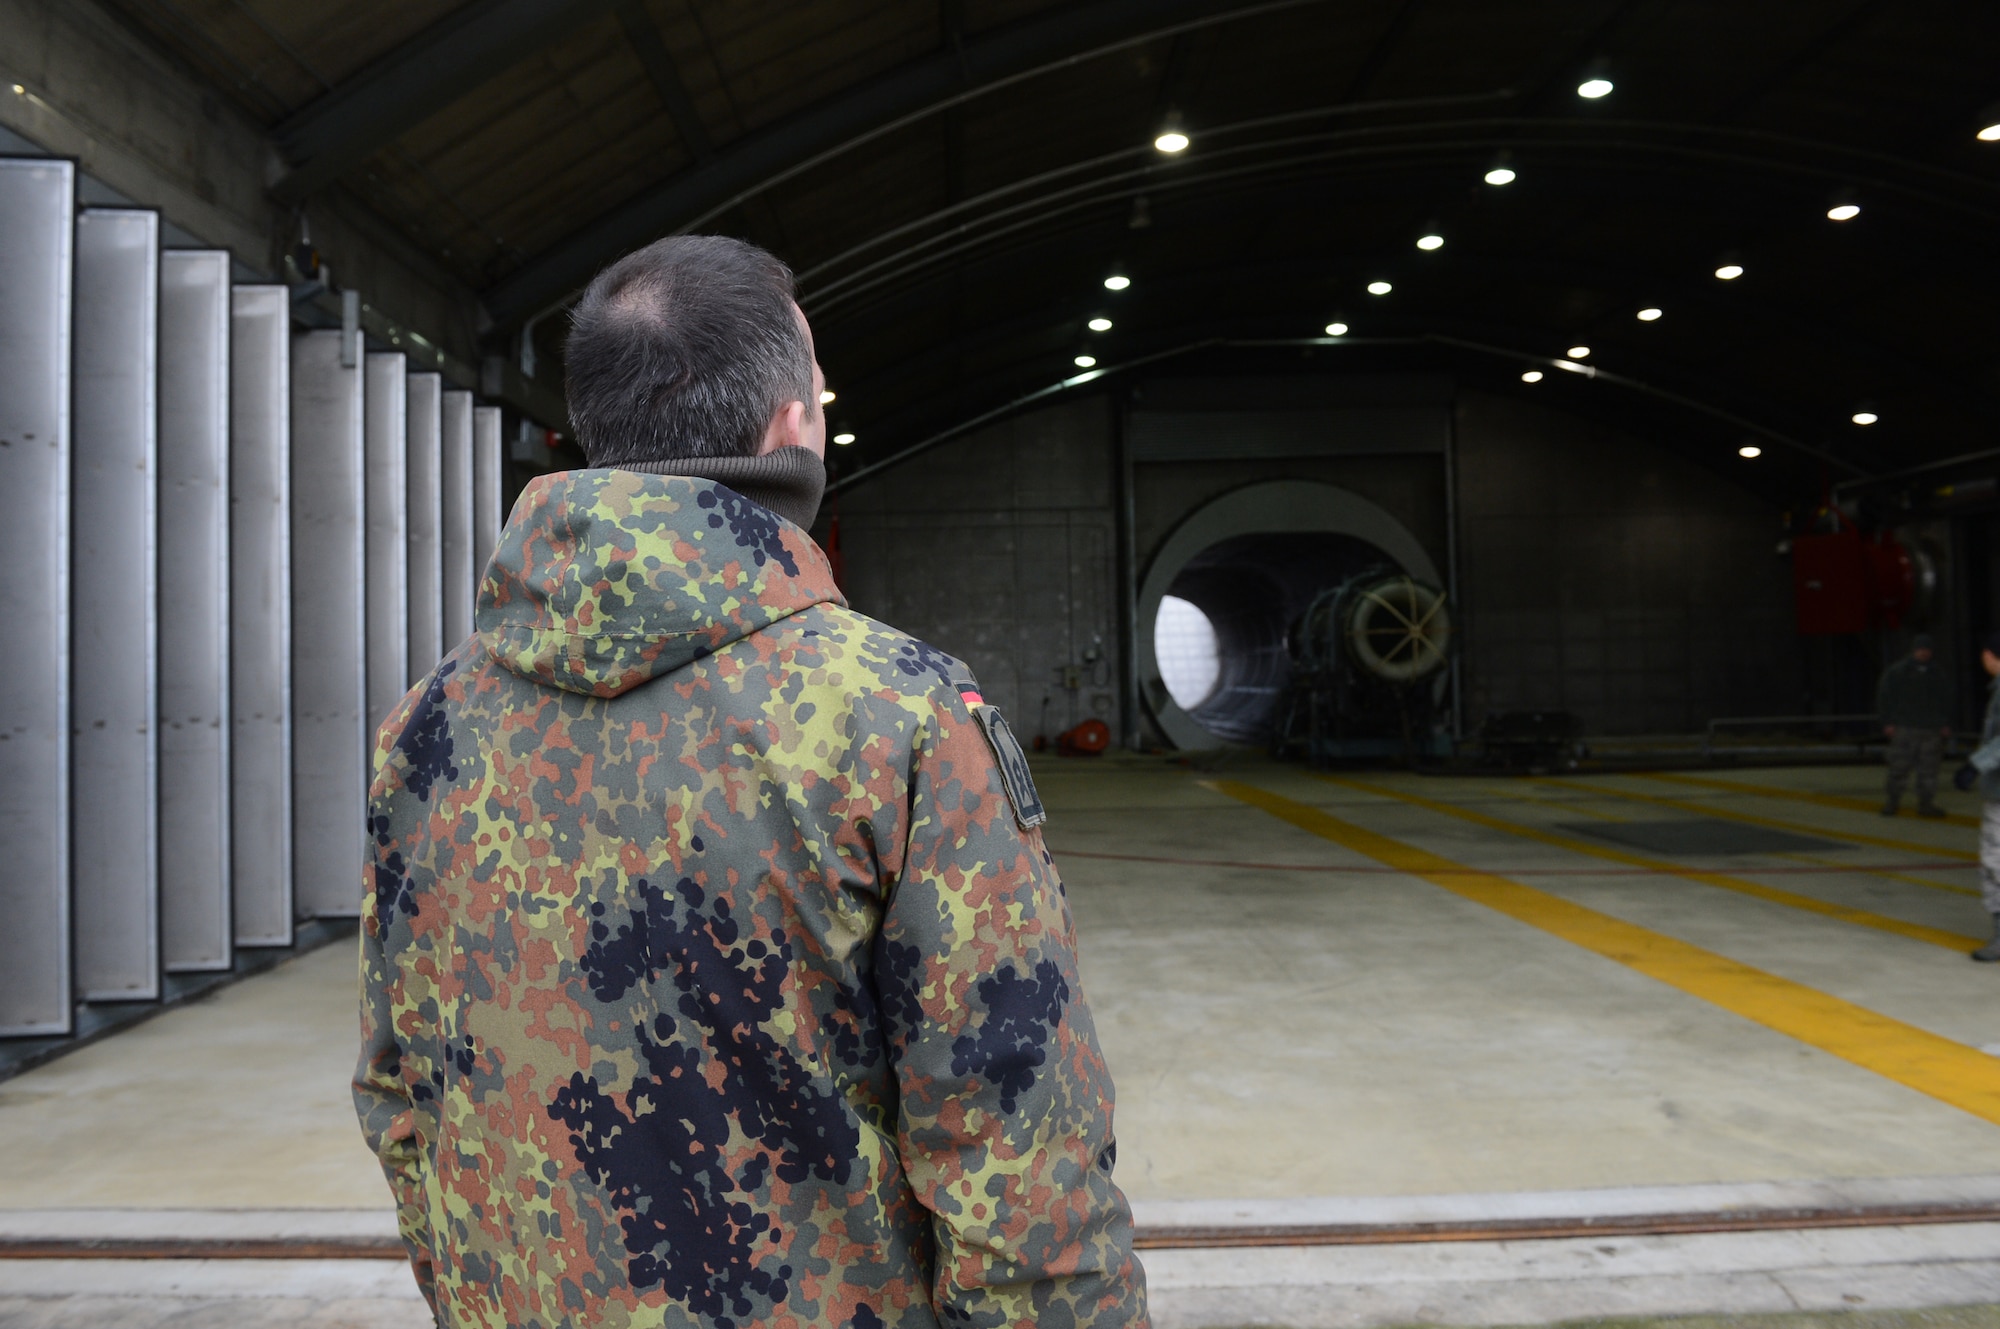 SPANGDAHLEM AIR BASE, Germany – A Ukrainian inspector looks at an empty facility on Spangdahlem Air Base Dec. 5, 2013. Inspectors evaluated the base to determine the compliance with the Conventional Armed Forces in Europe treaty. (U.S. Air Force photo by Airman 1st Class Kyle Gese/Released)